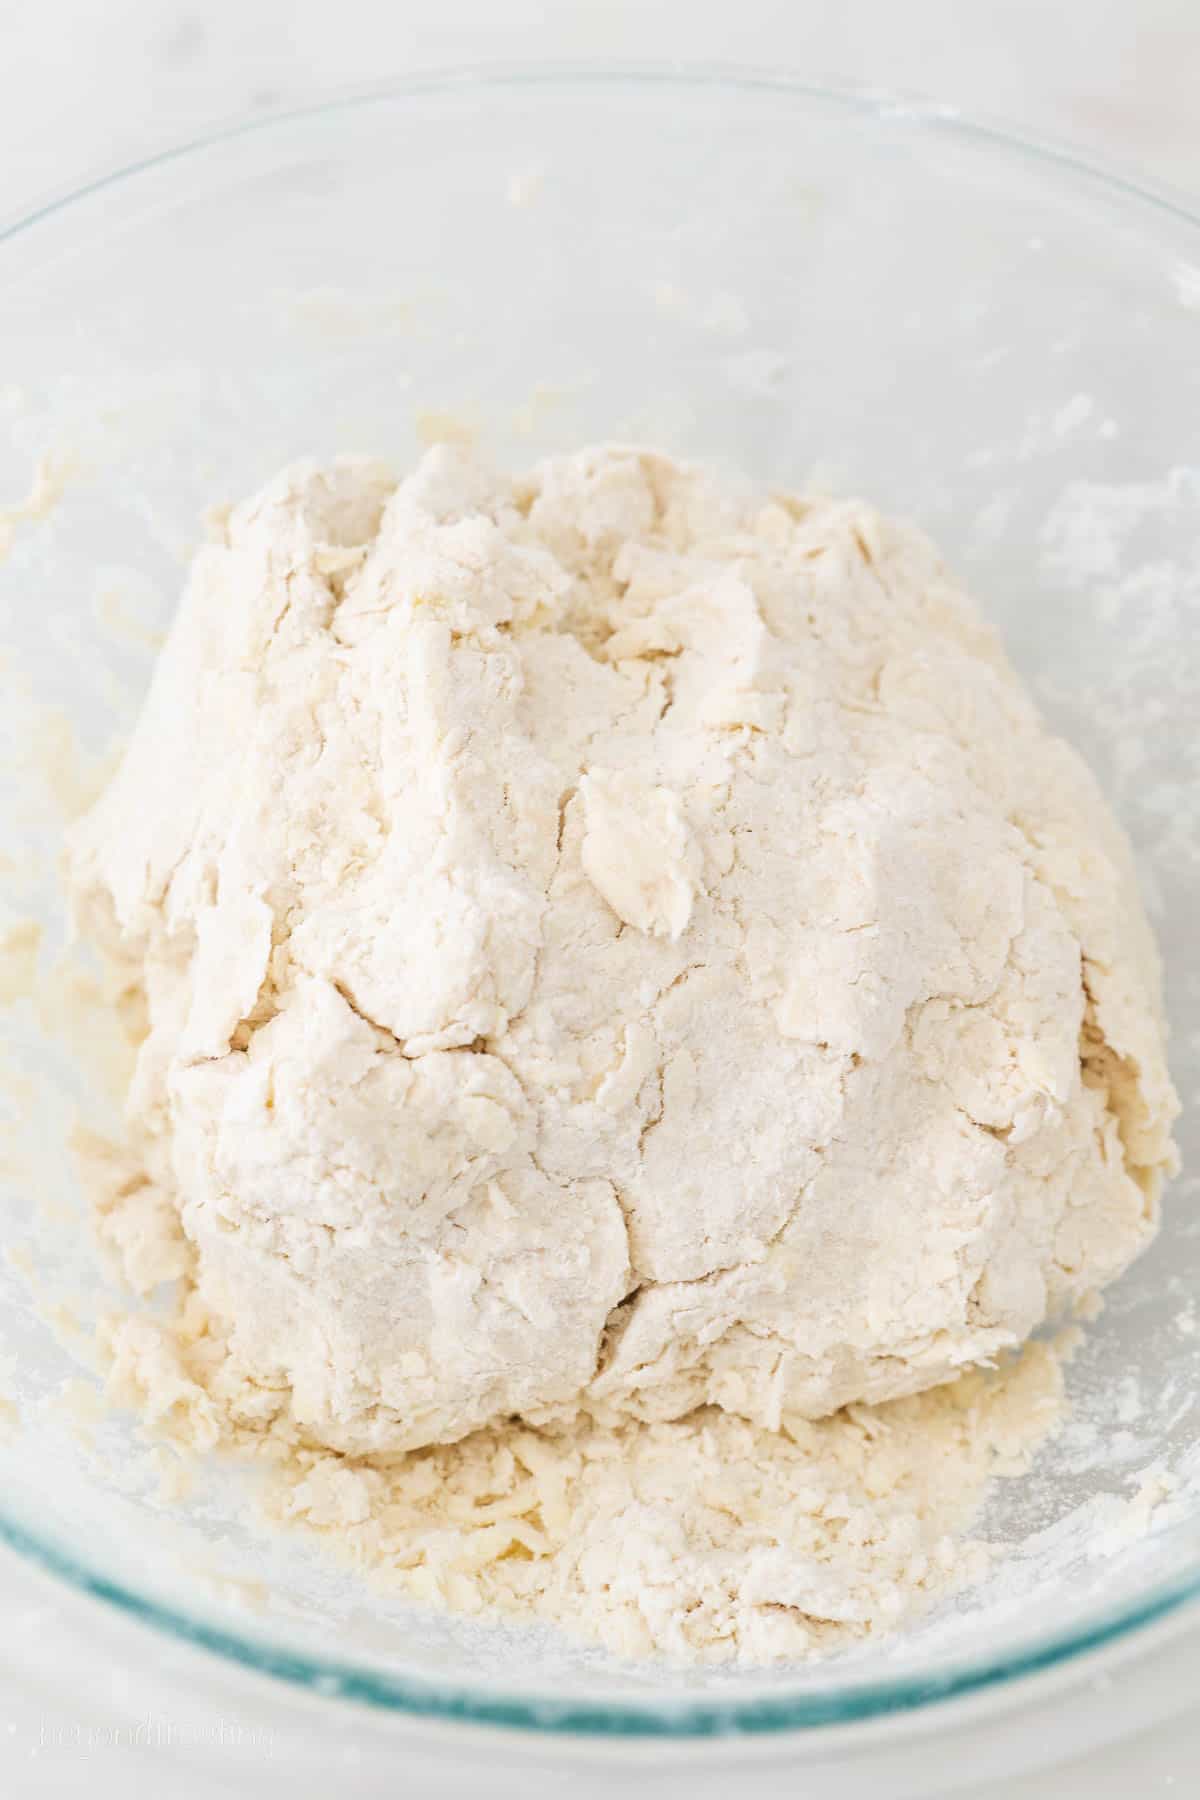 Buttermilk Biscuits dough comes together in a rough ball